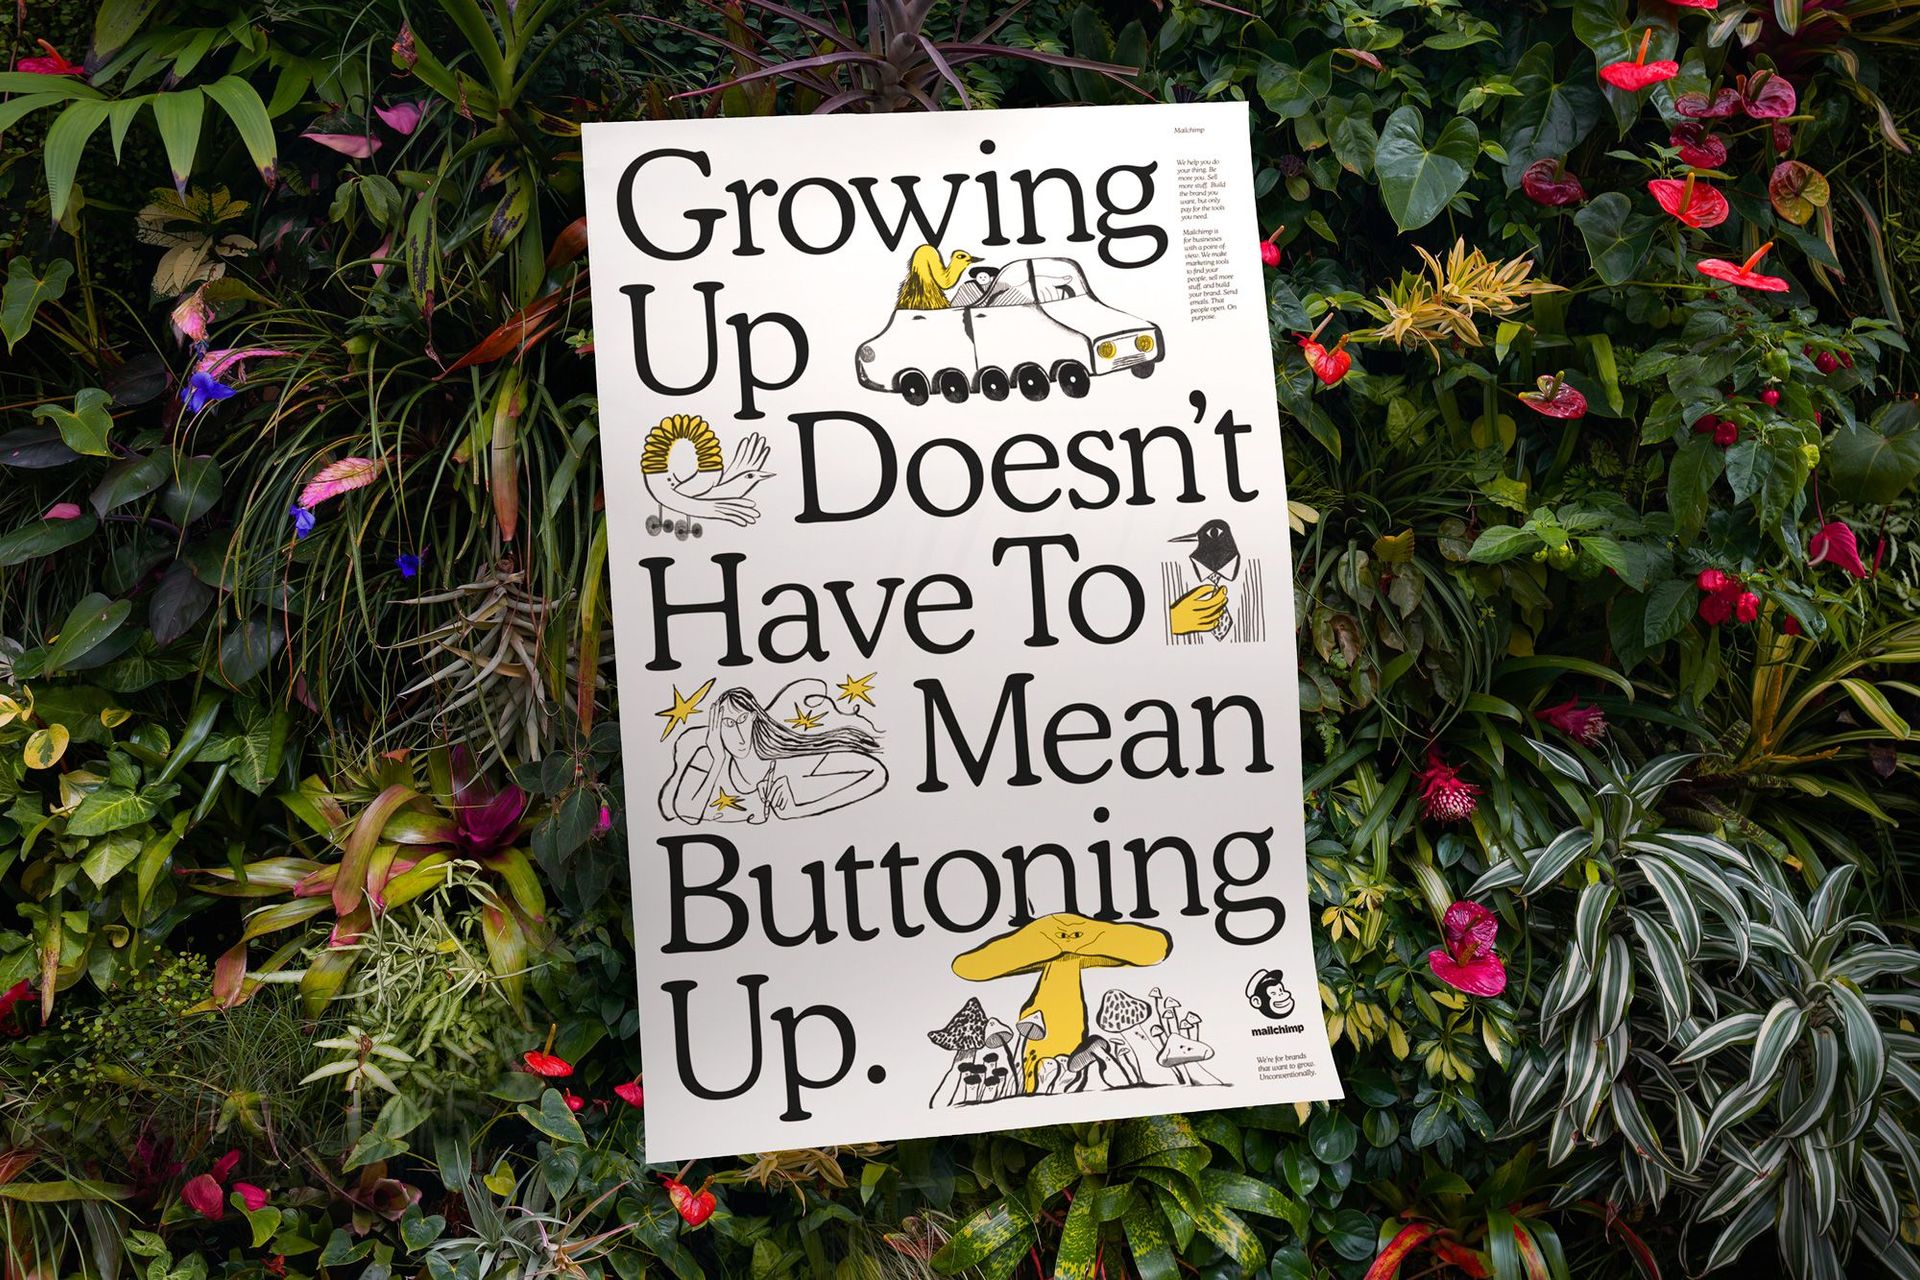 A Mailchimp ad that reads, “Growing up doesn’t have to mean buttoning up.”